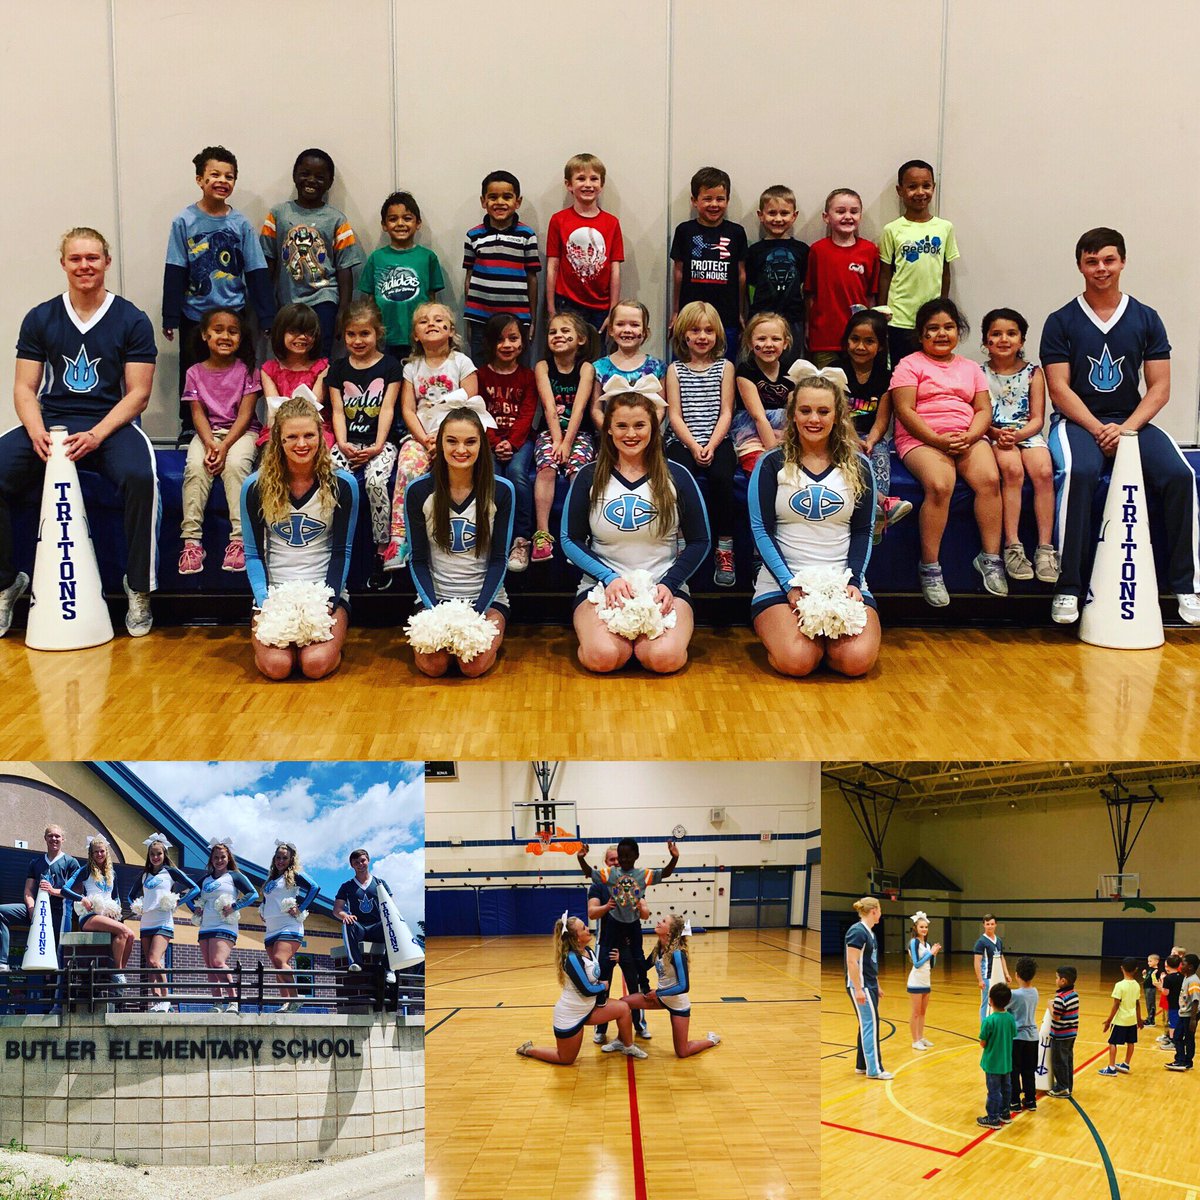 A few of our cheerleaders were able to give back to the community last Friday. We had so much fun working with Mrs. Olson’s Kindergarten class at Butler Elementary. Thank you for having us. #TritonNation #TheTritonWay #GivingBack